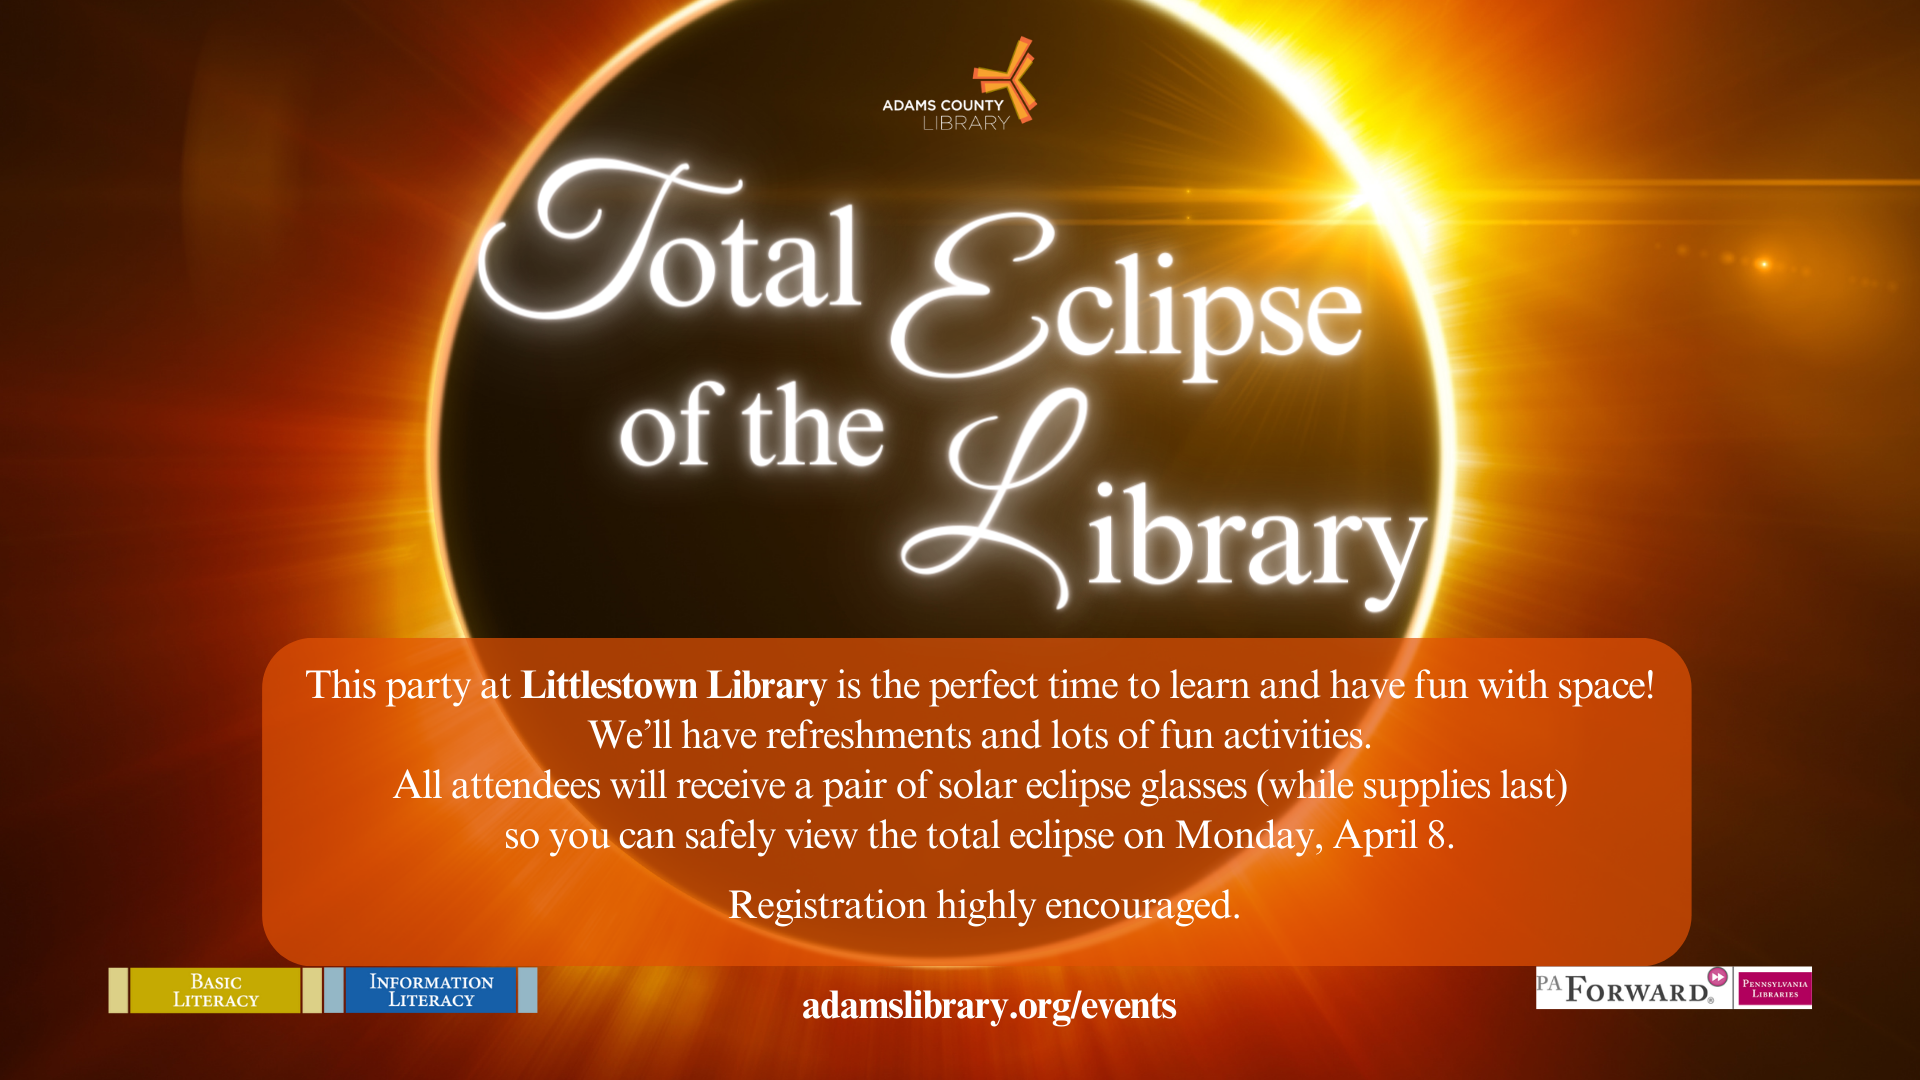 Total Eclipse of the Library Party